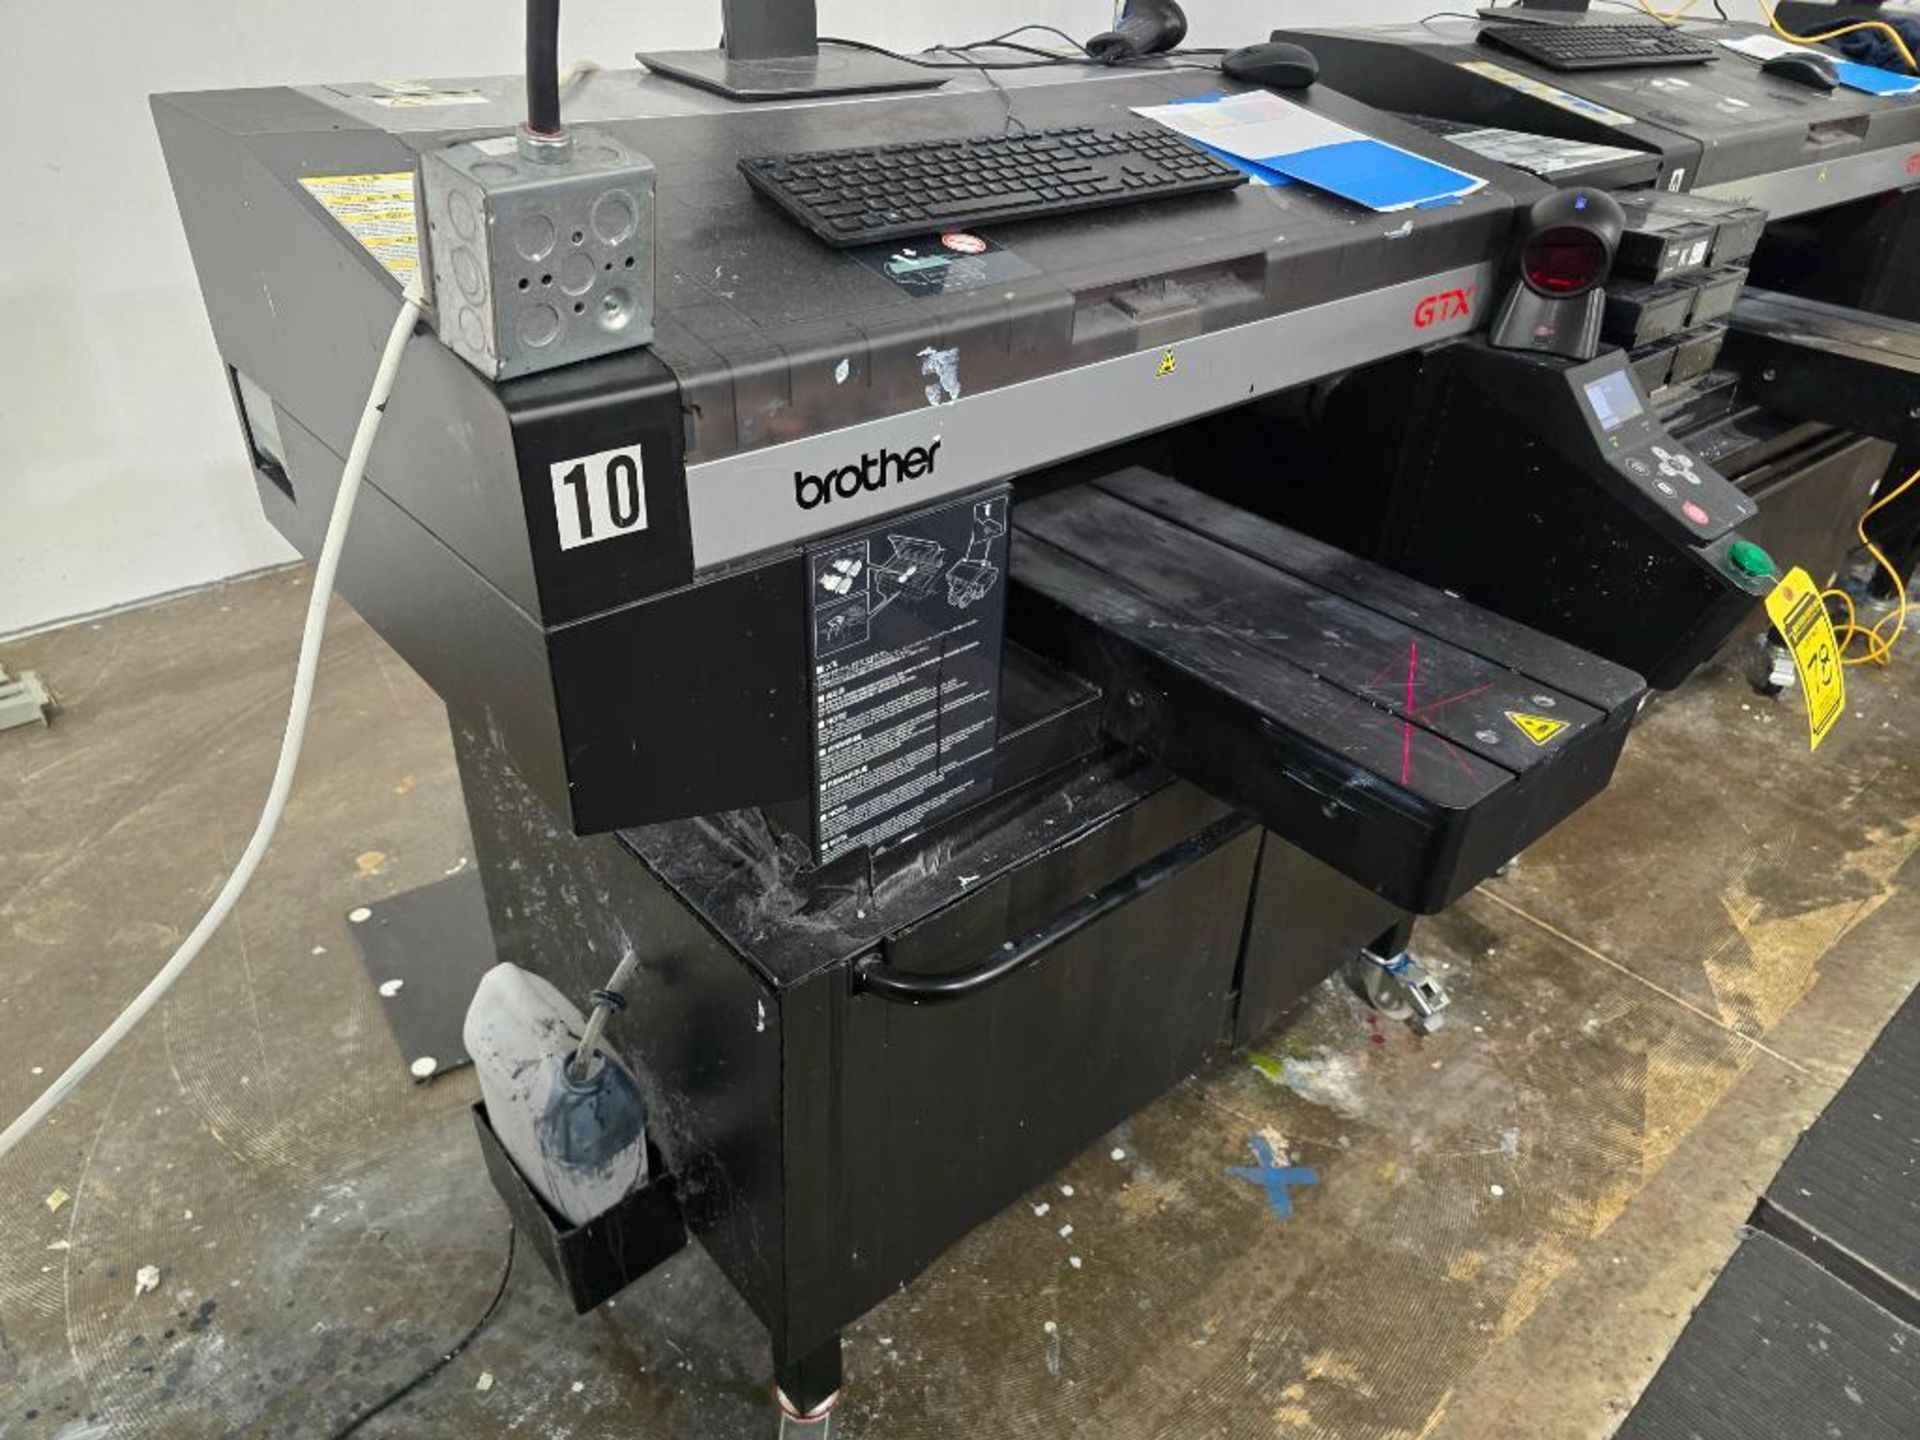 2018 Brother GTX-422 DTG (Direct to Garment) Printer, Twin Head, 6-Color, Water Based Pigmented Ink, - Image 3 of 9